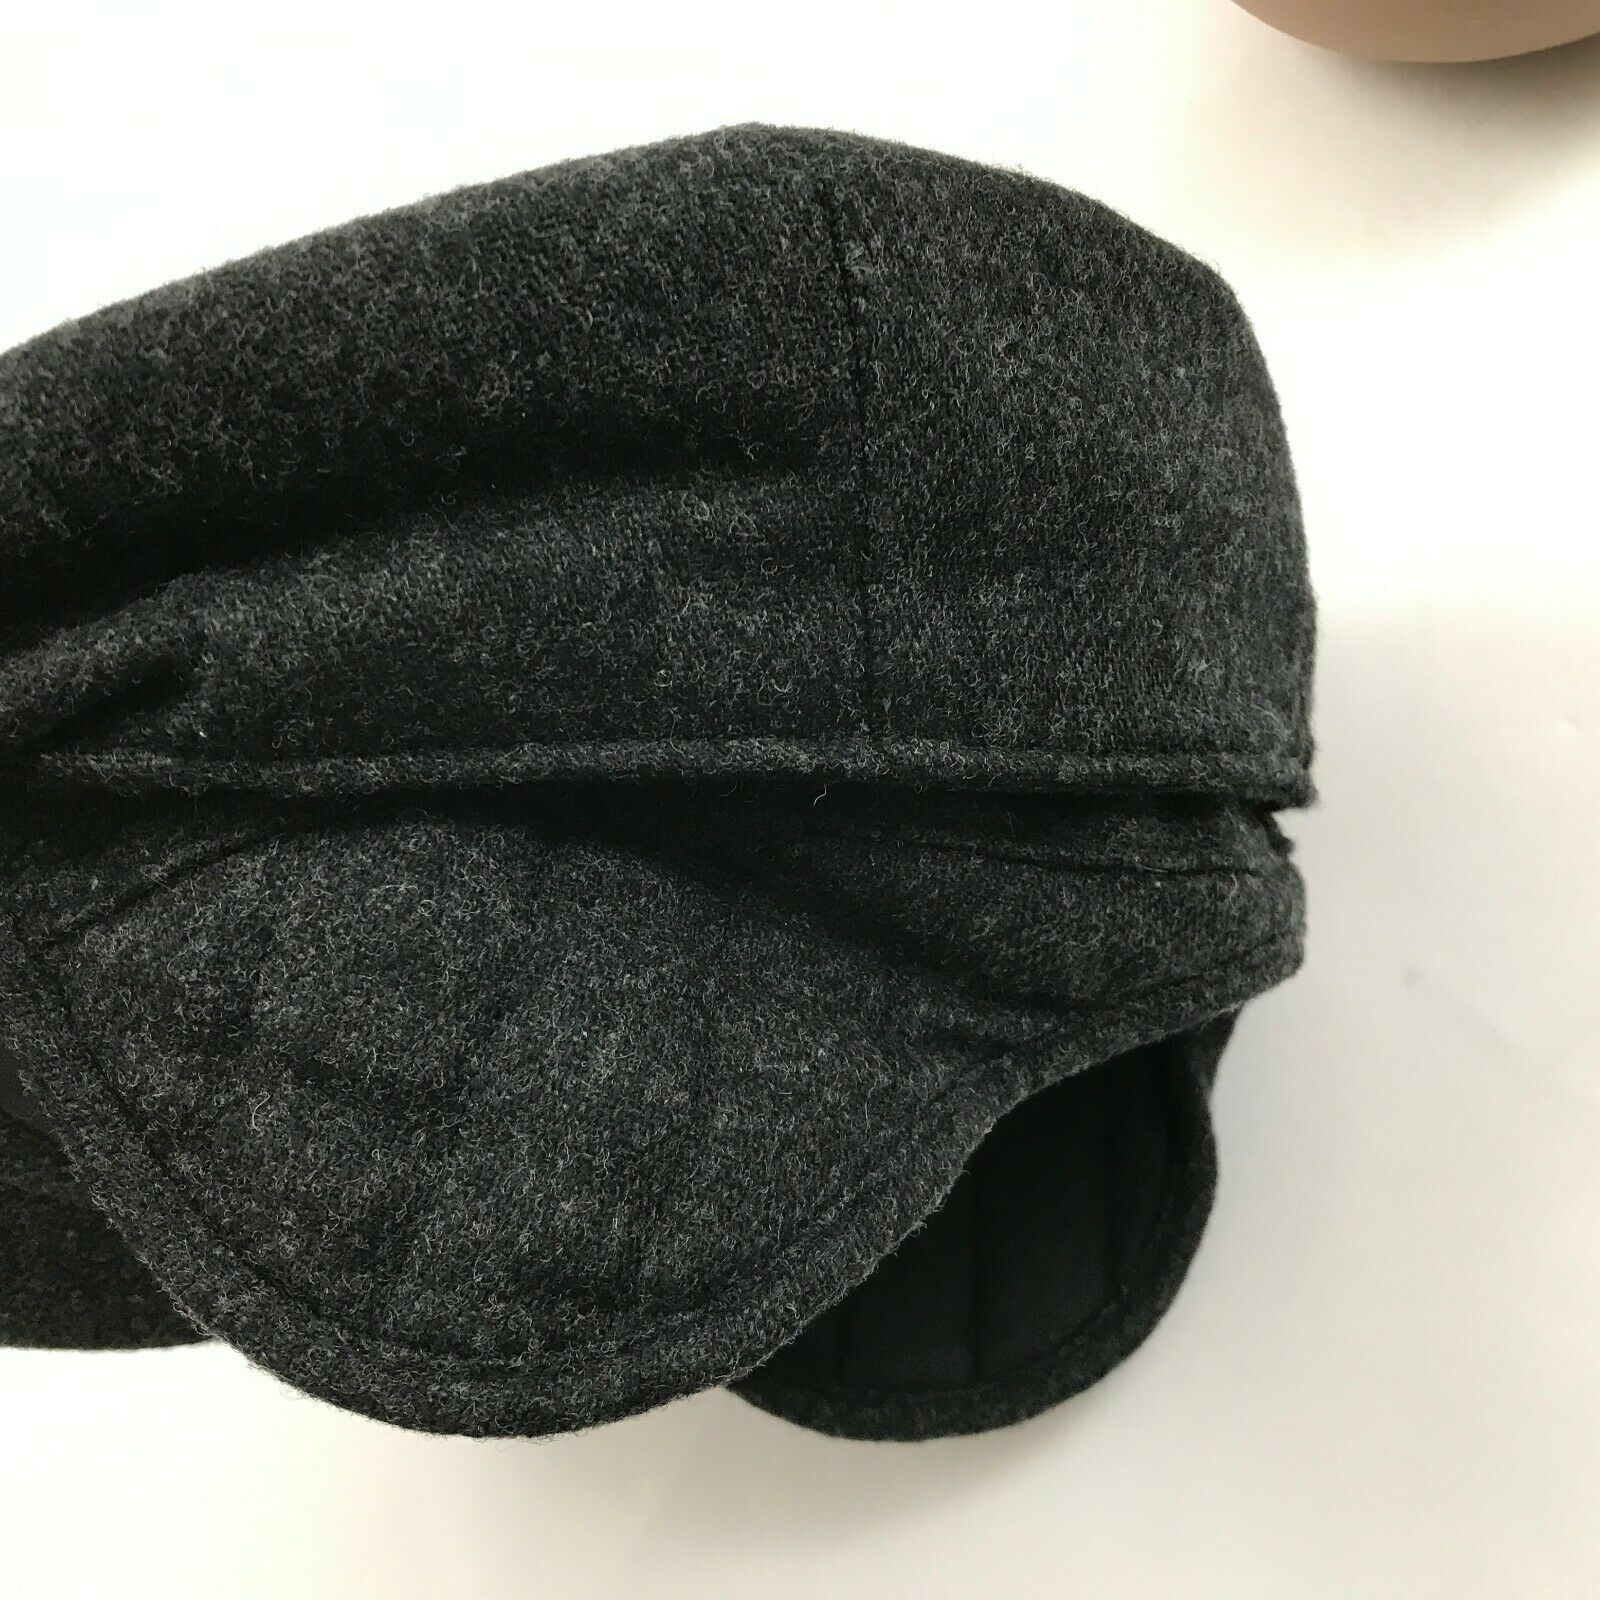 VINTAGE Malrov Flat Cap Wool Newsboy Hat Cabbie Ear Flaps Quilt Lined ...